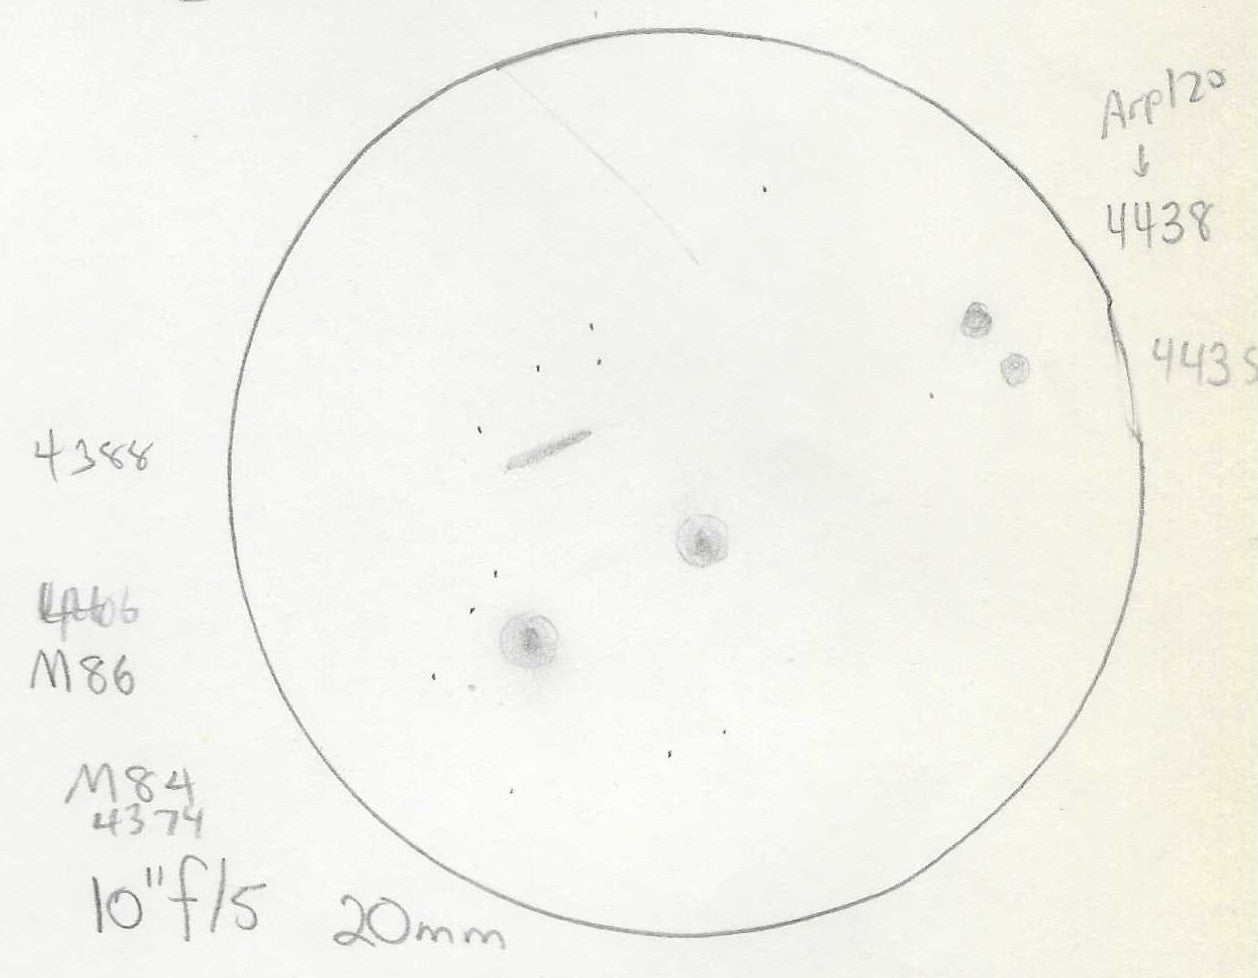 Sketch of M86 and M84